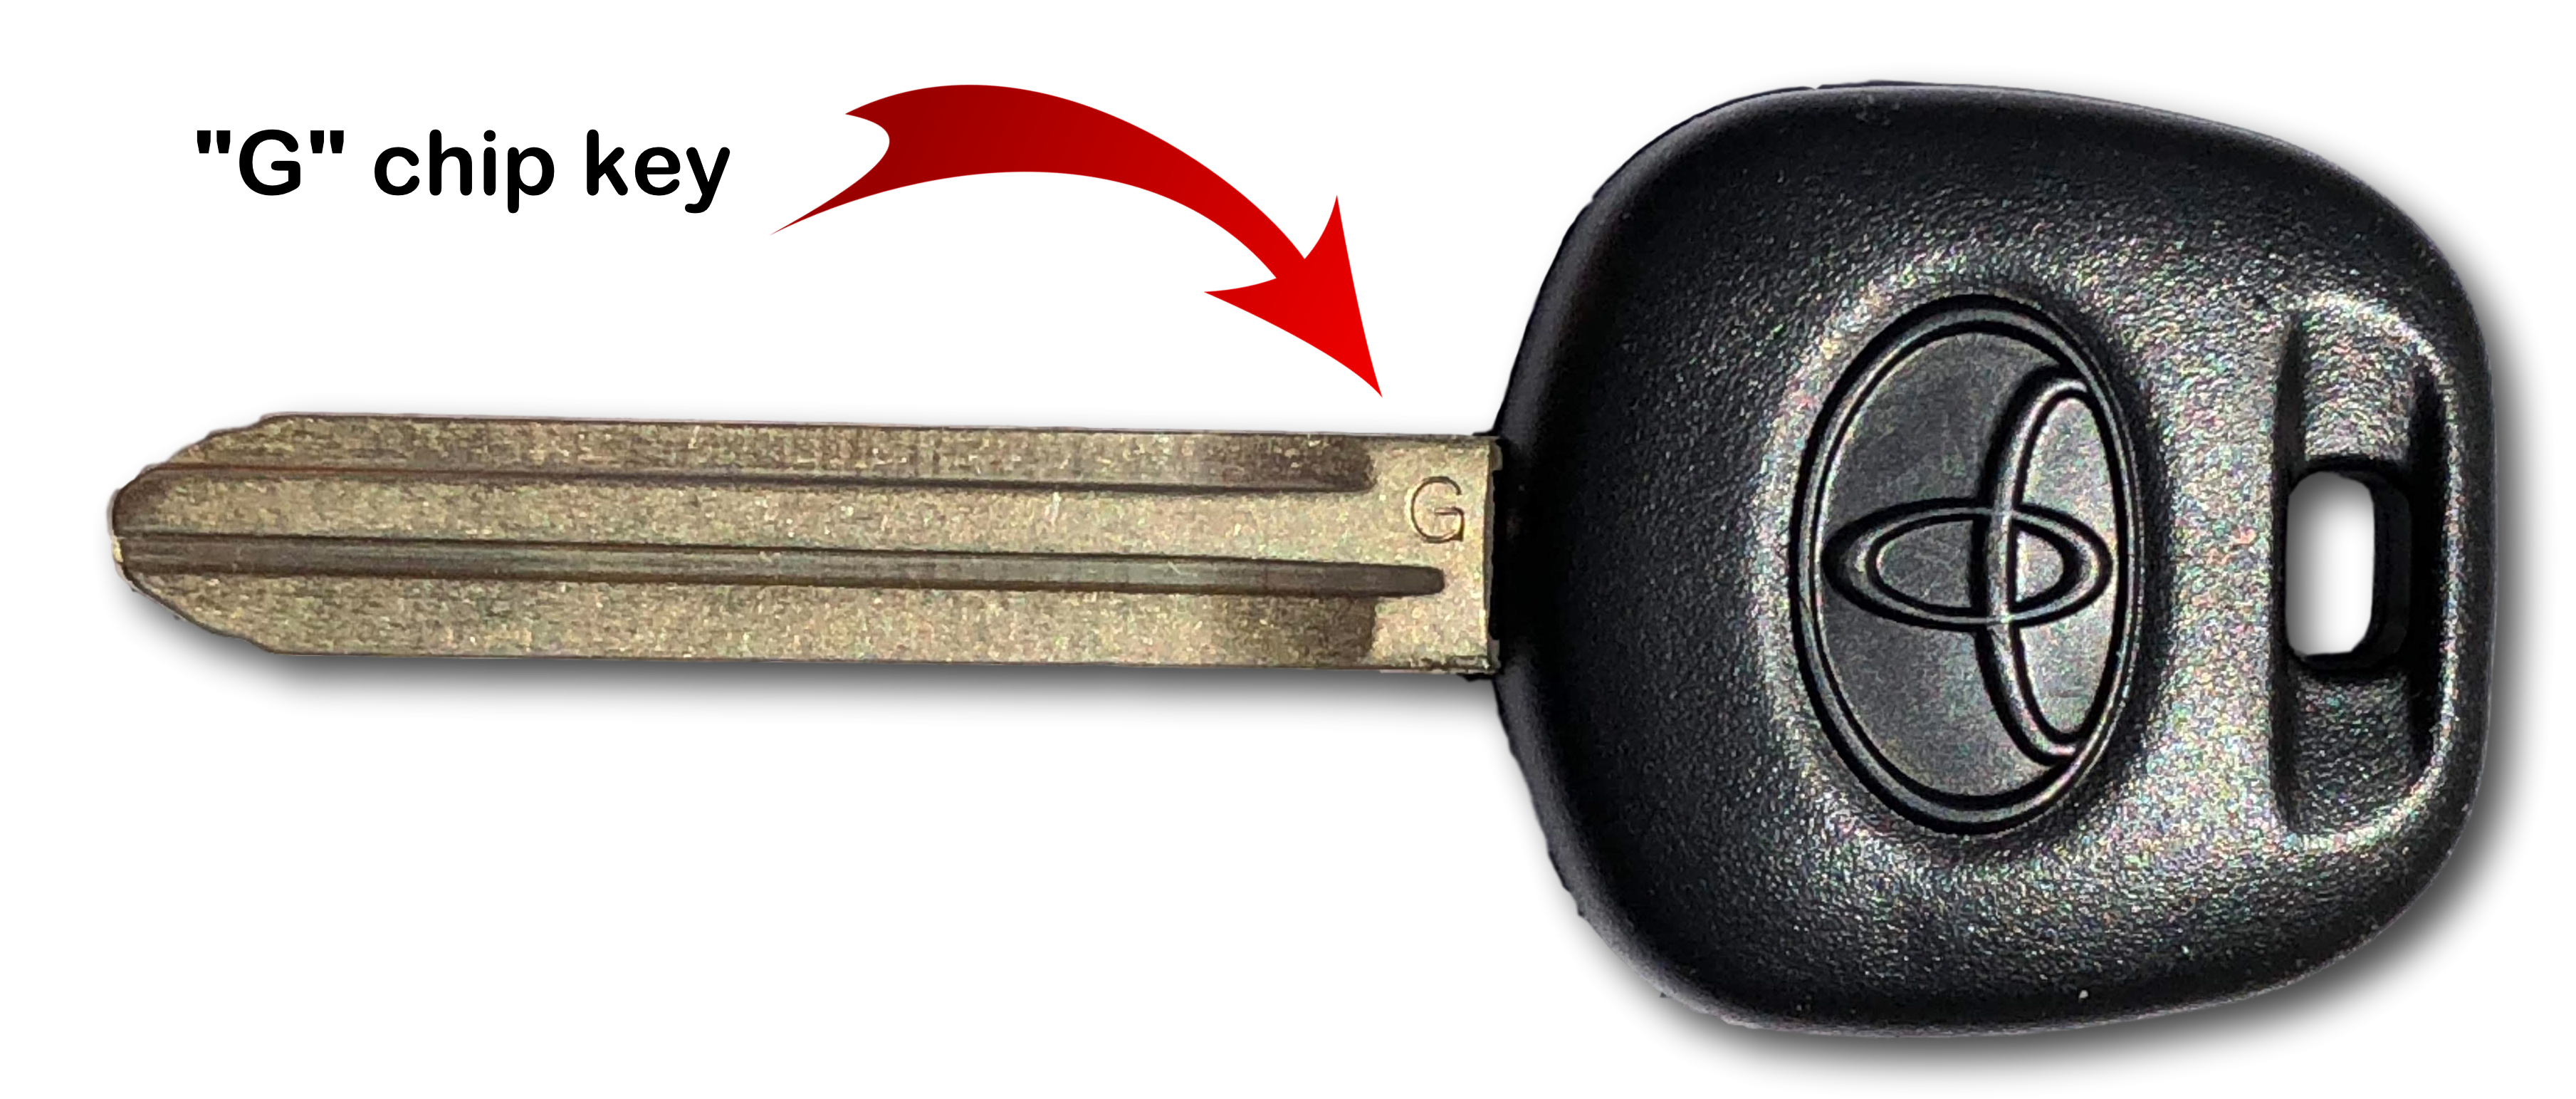 Toyota Logo "G" Chip Transponder Key for Select Toyota and Scion Vehicles, Rubber Handle - Tom's Key Company